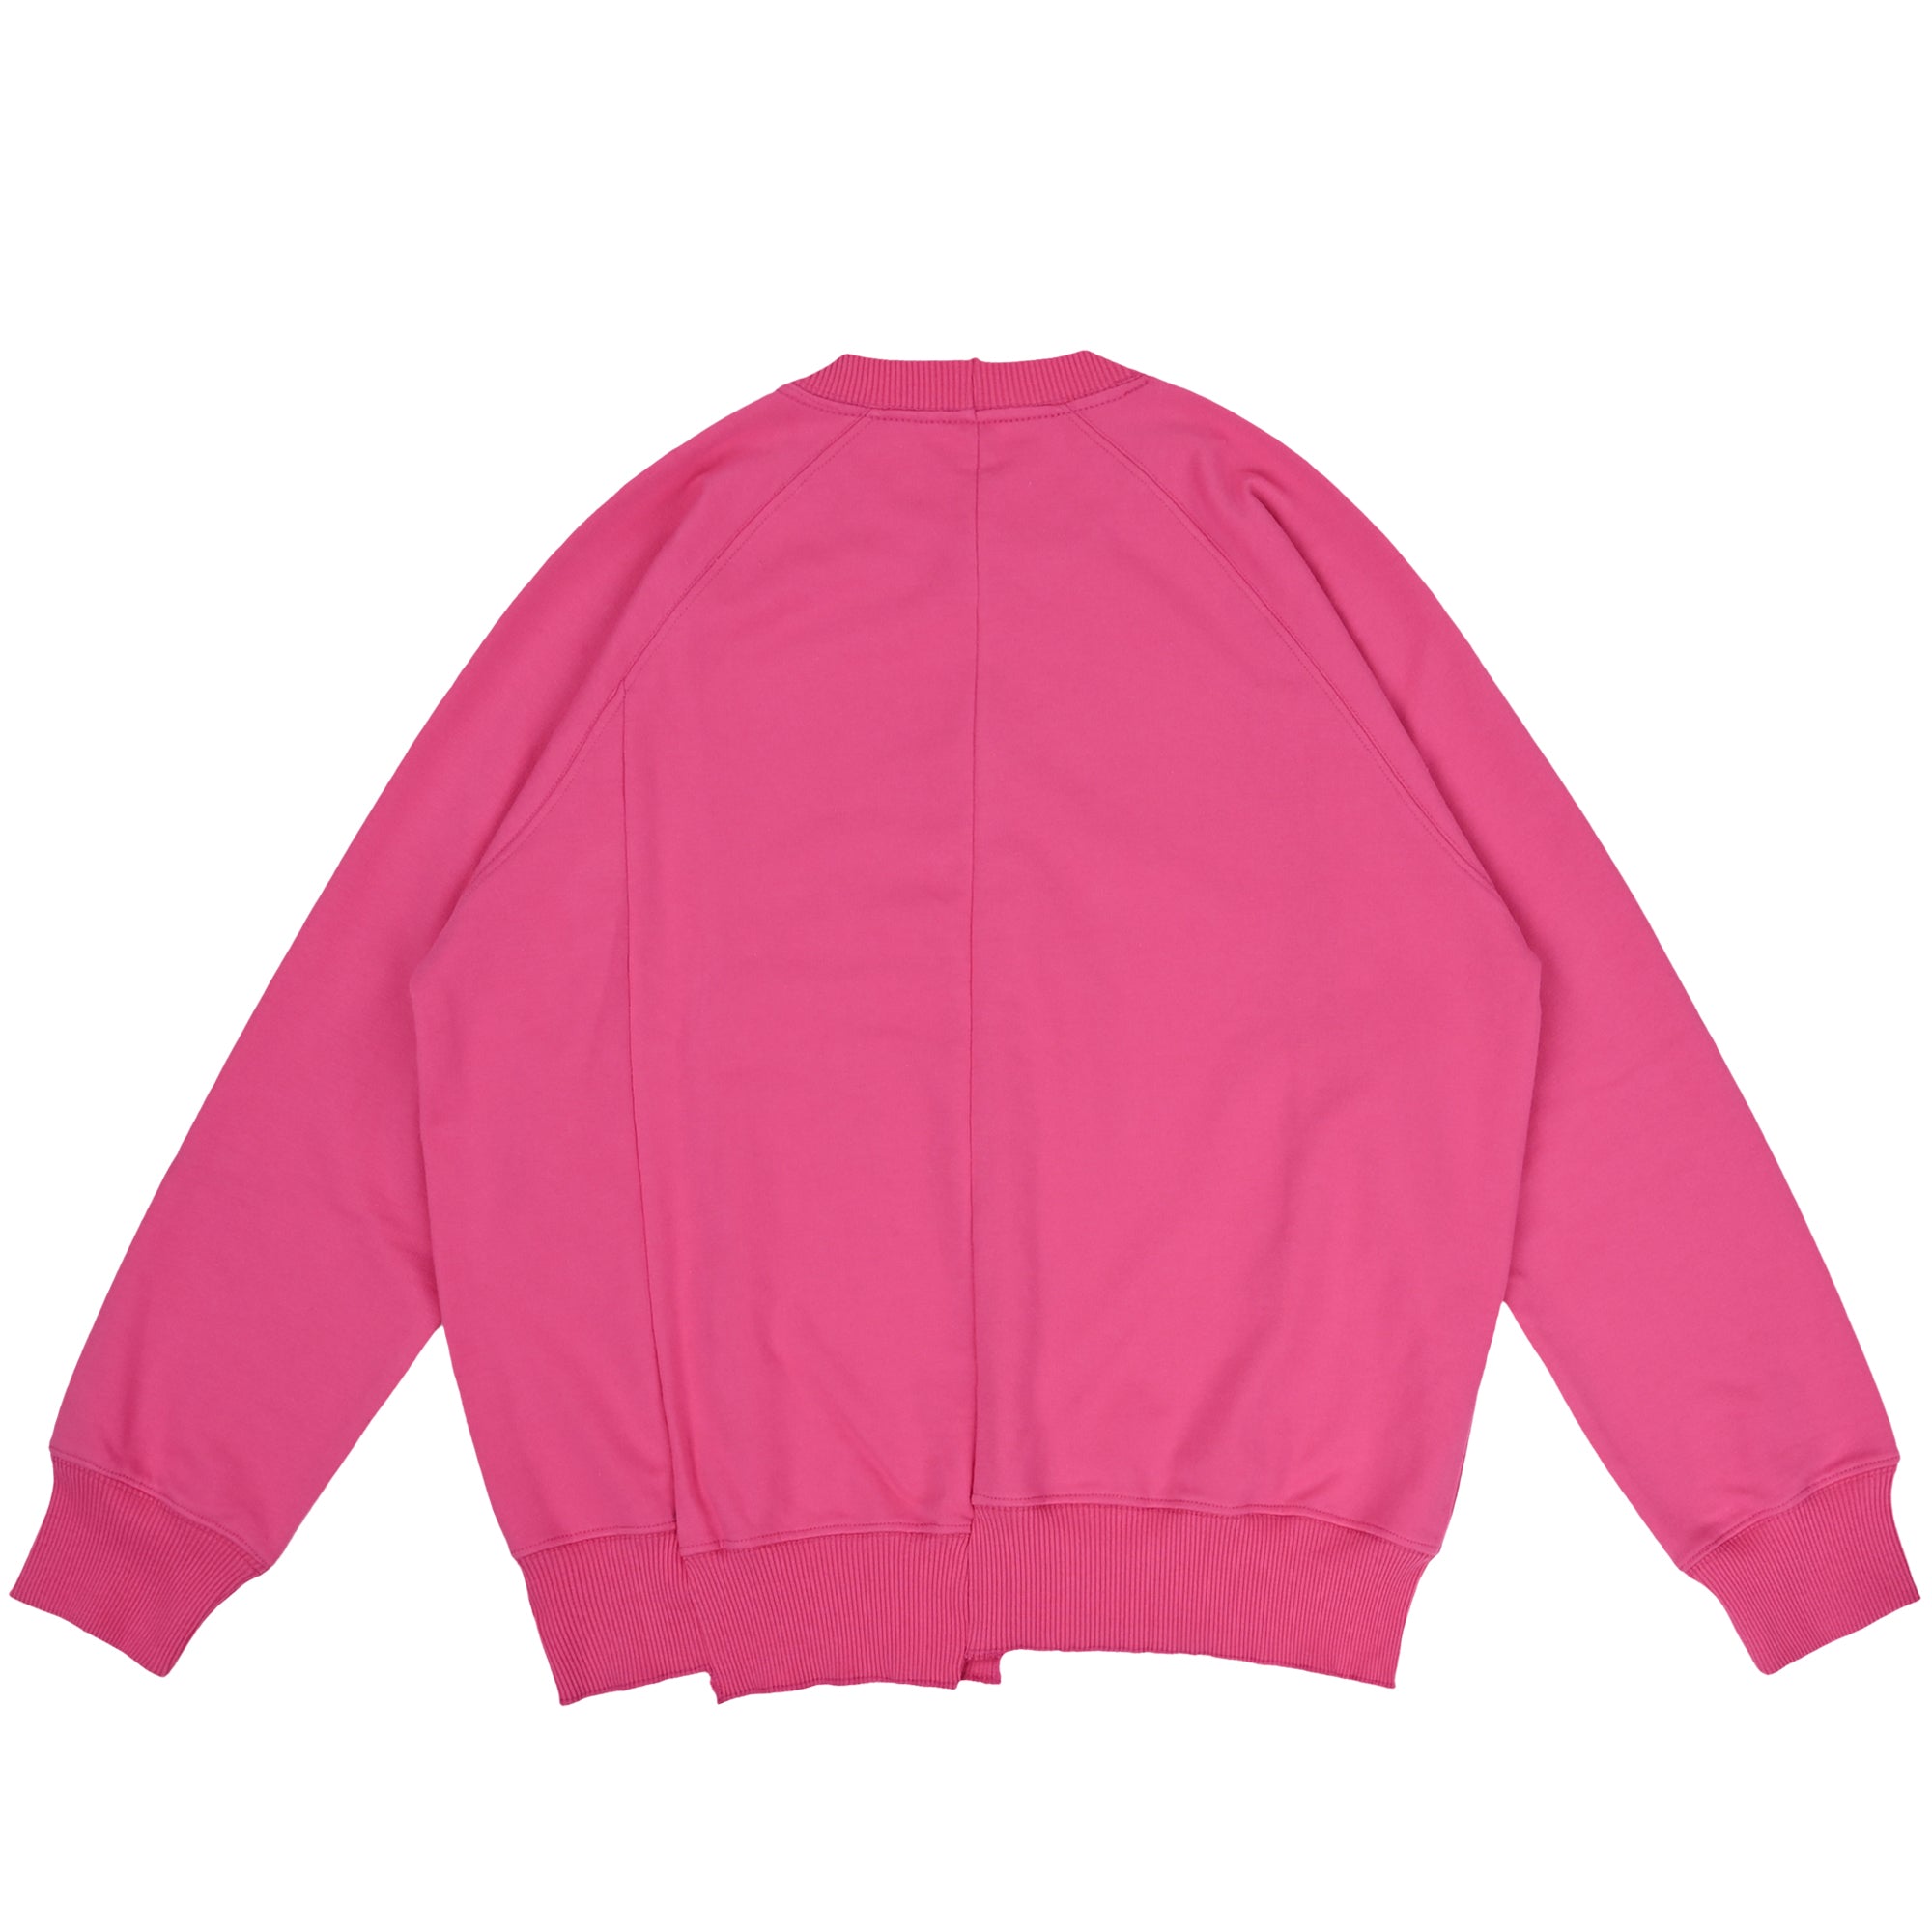 The Salvages 'Sublime' Reconstructed Raglan Sweatshirt in Pink